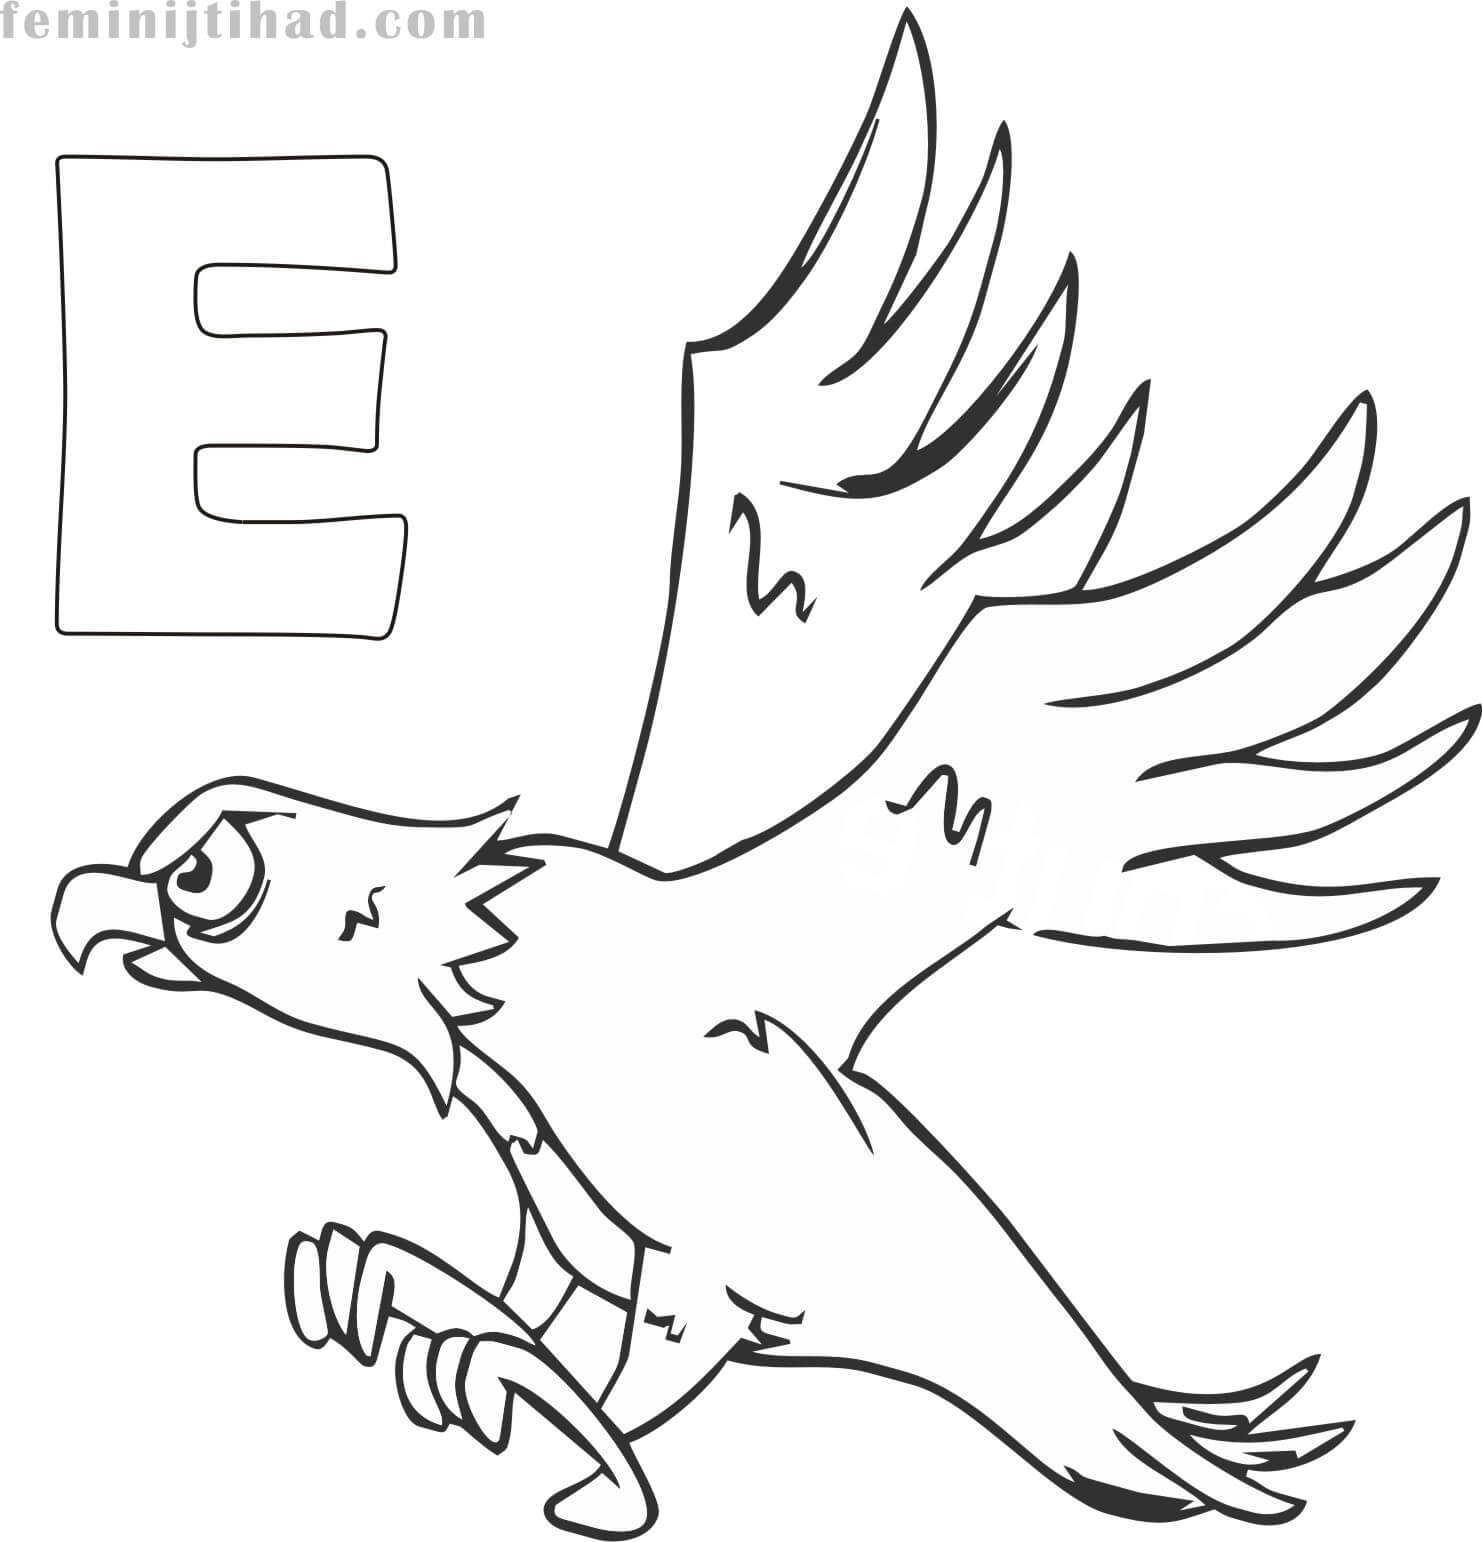 coloring page of eagle flying